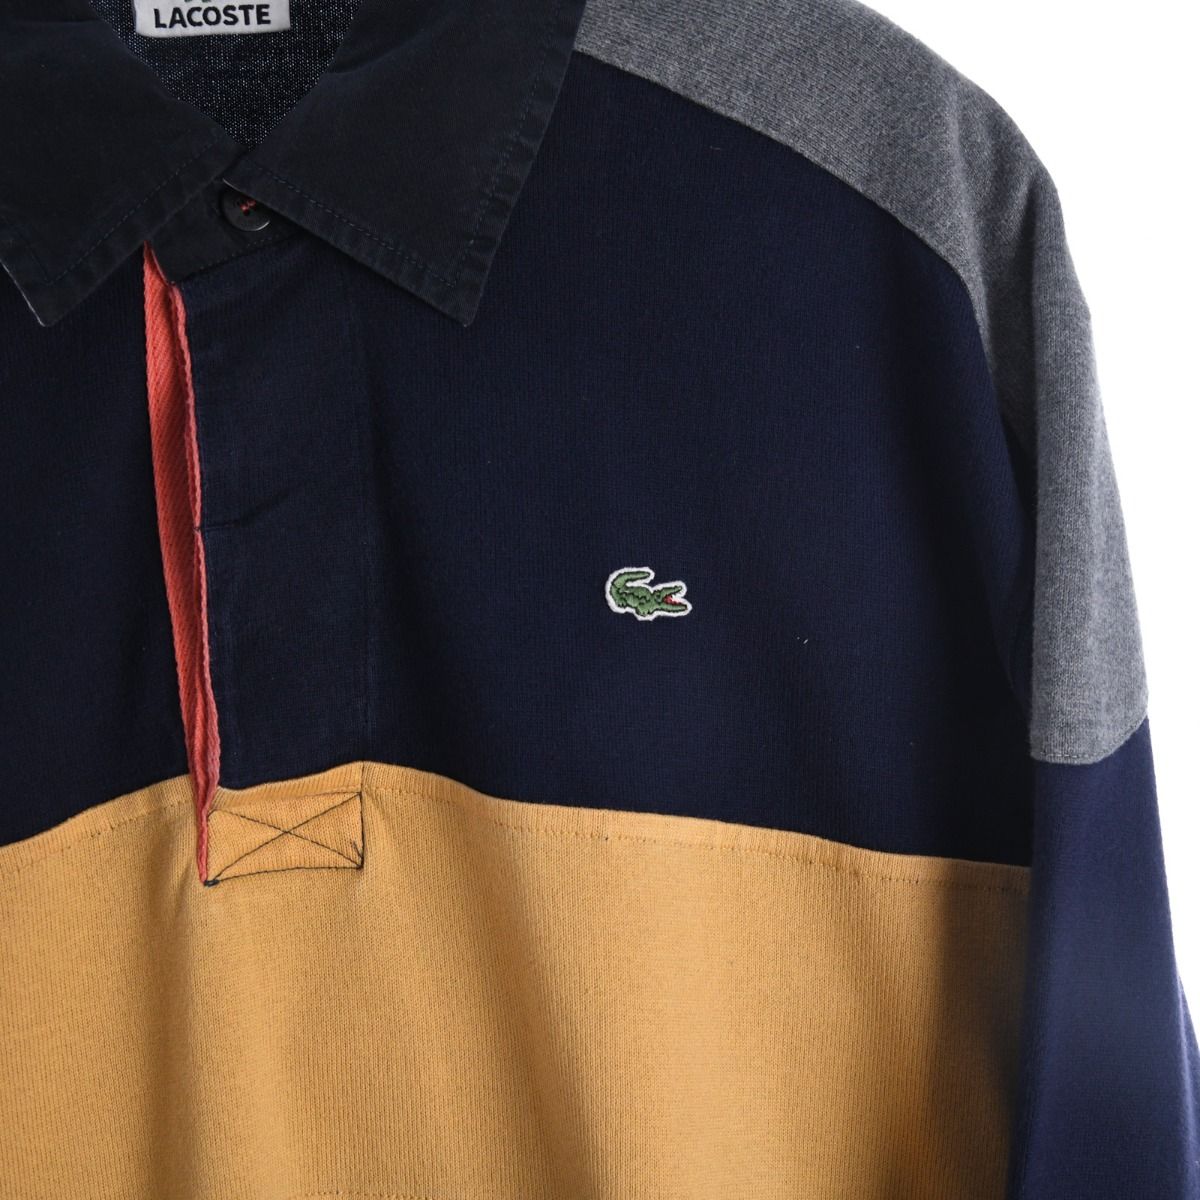 Lacoste Rugby Shirt